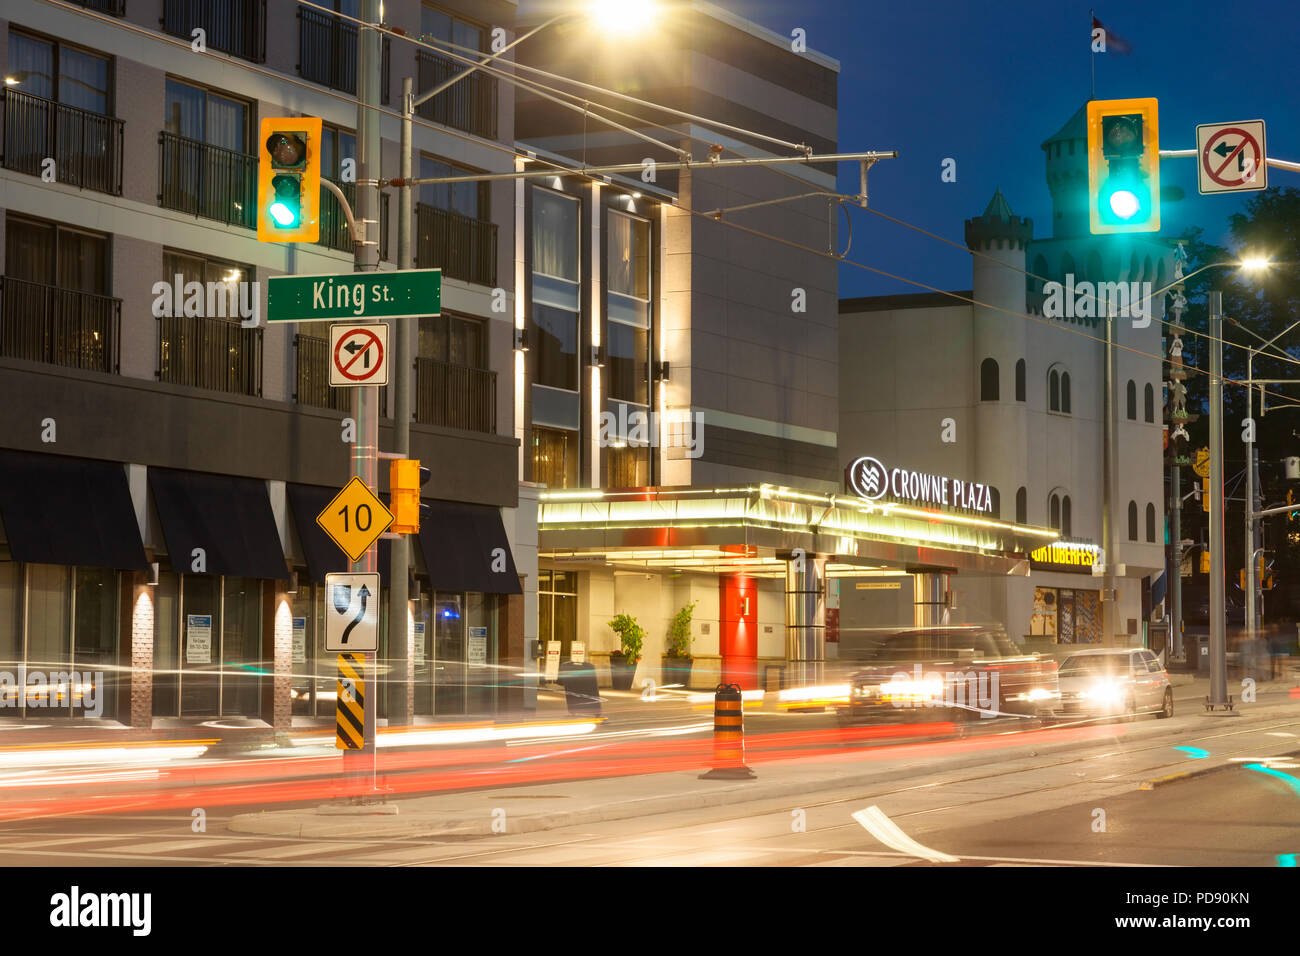 The Crowne Plaza Hotel along Benton Street at dusk in downtown Kitchener, Ontario, Canada. Stock Photo